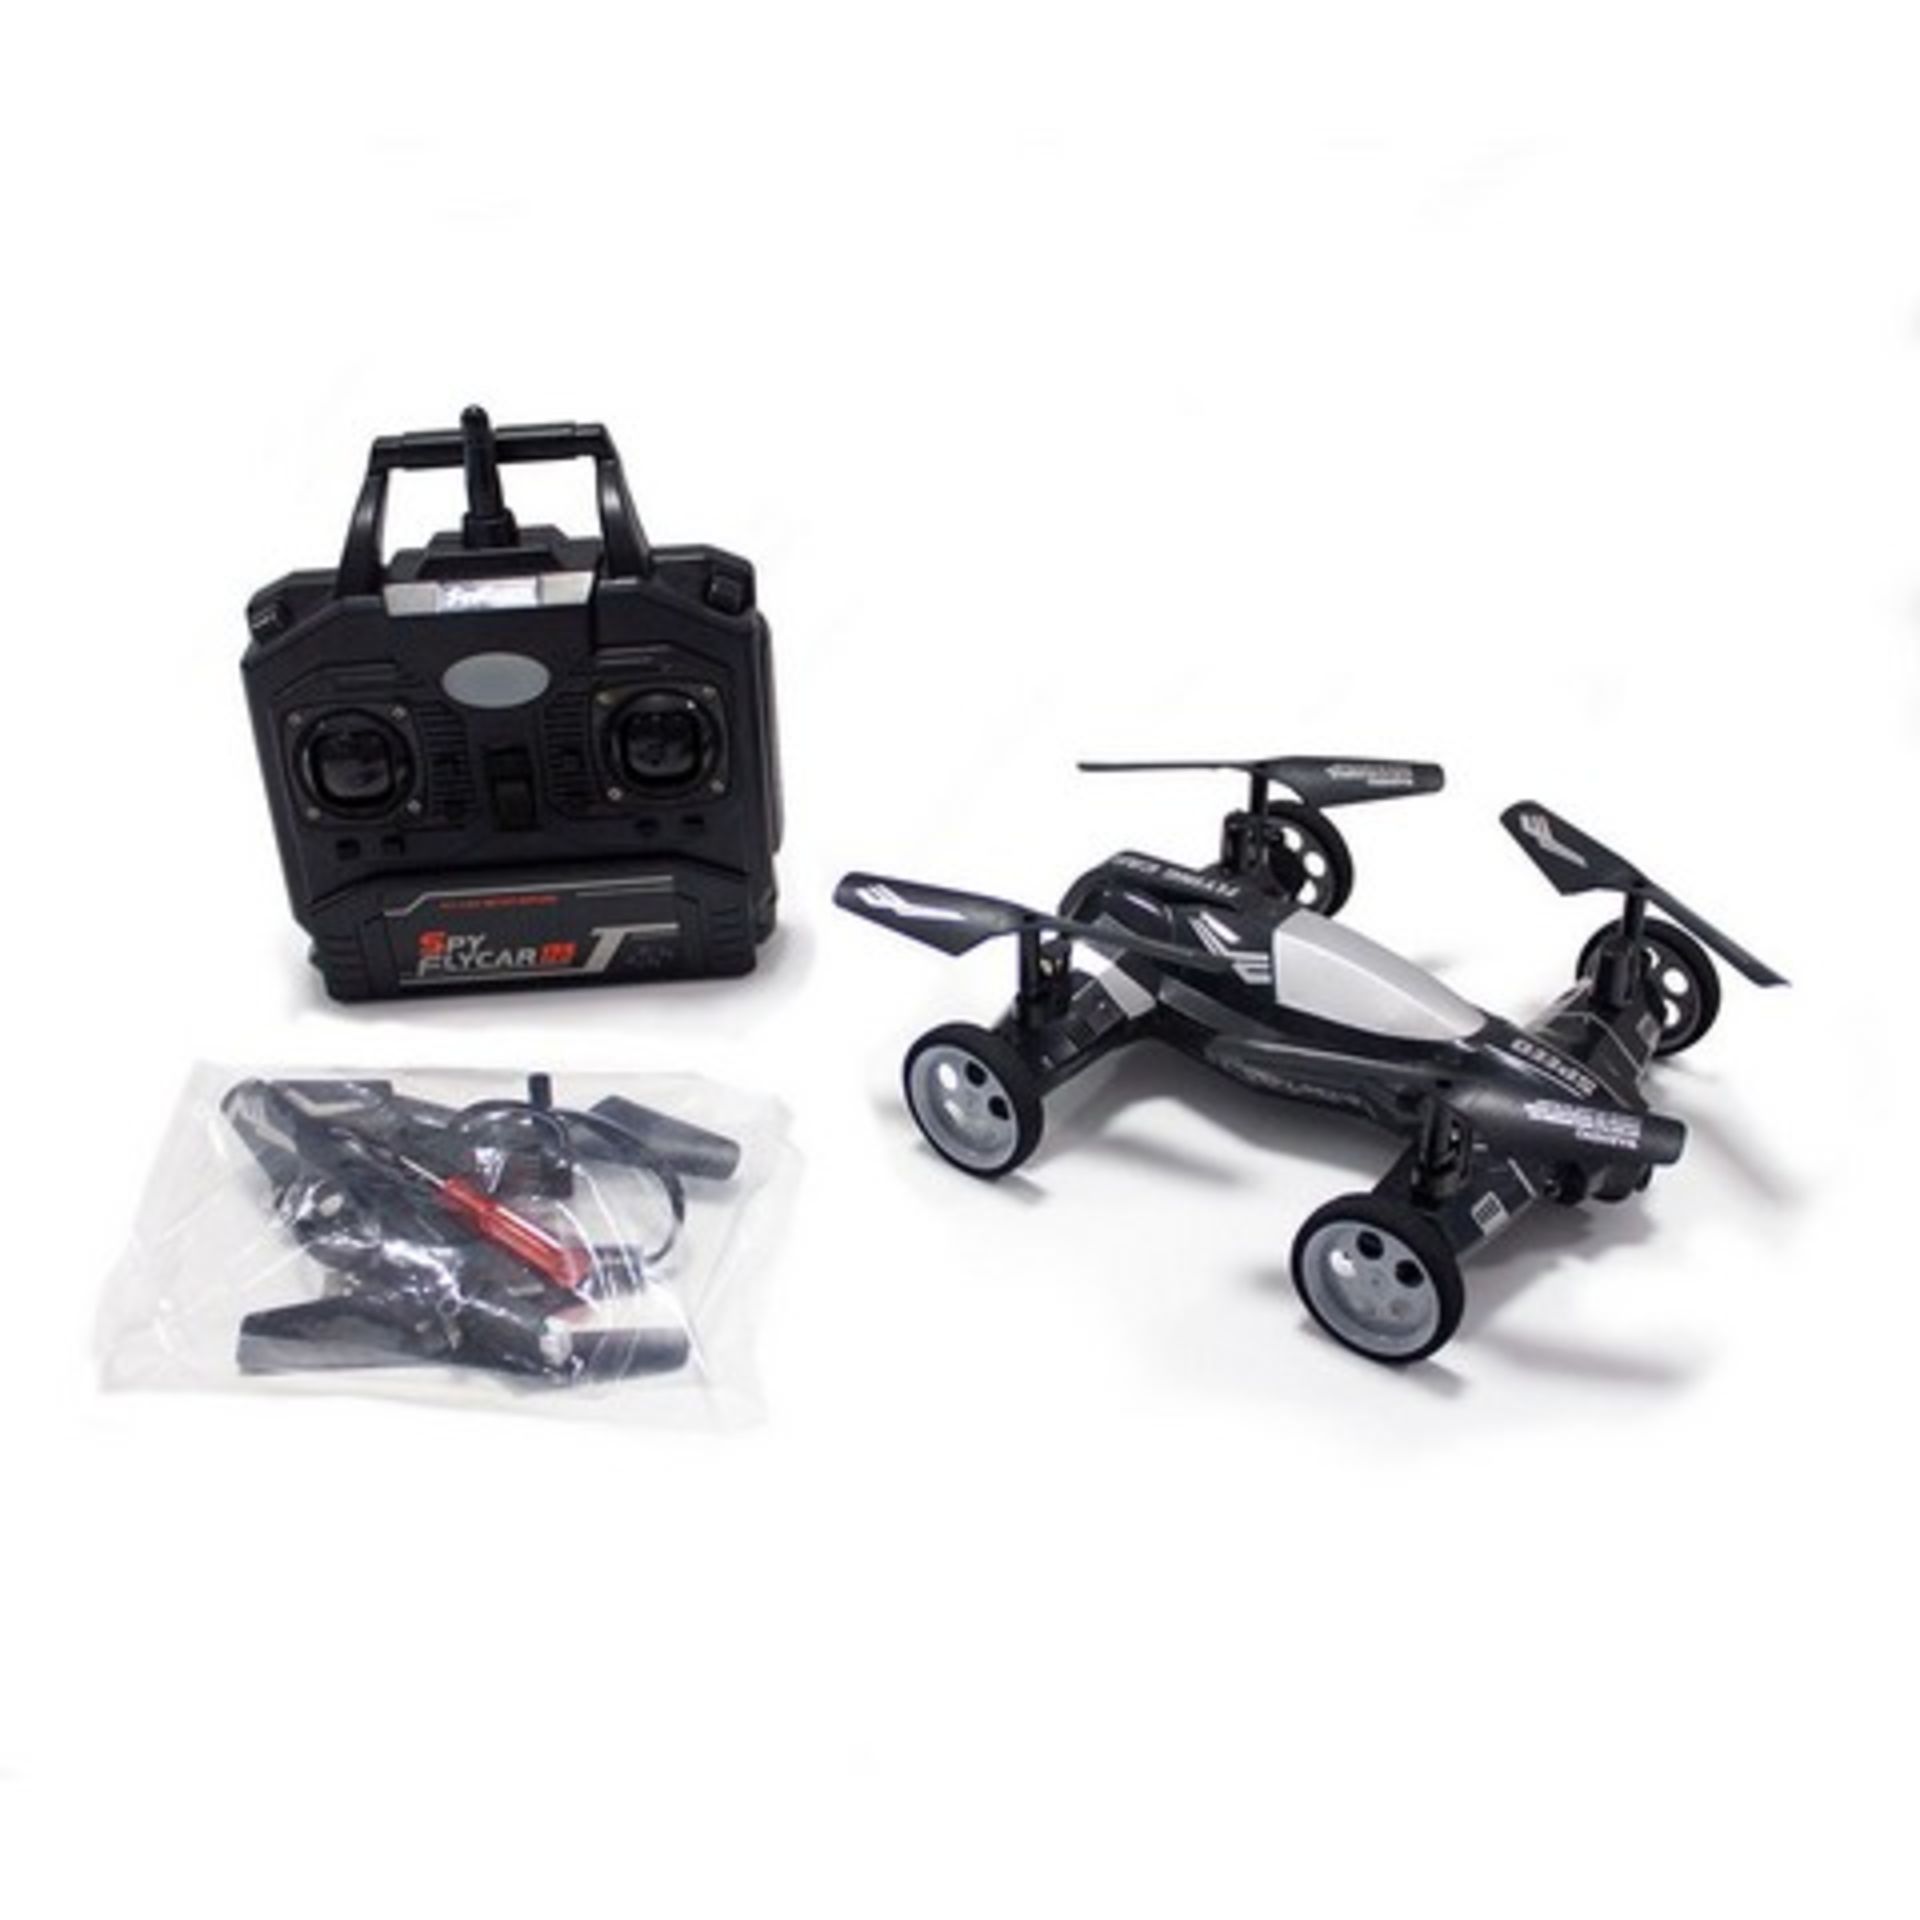 V Brand New Radio Control Quad-Copter Orbit Moon Buggy - 720P HD Camera - 4GB Micro SD Card Included